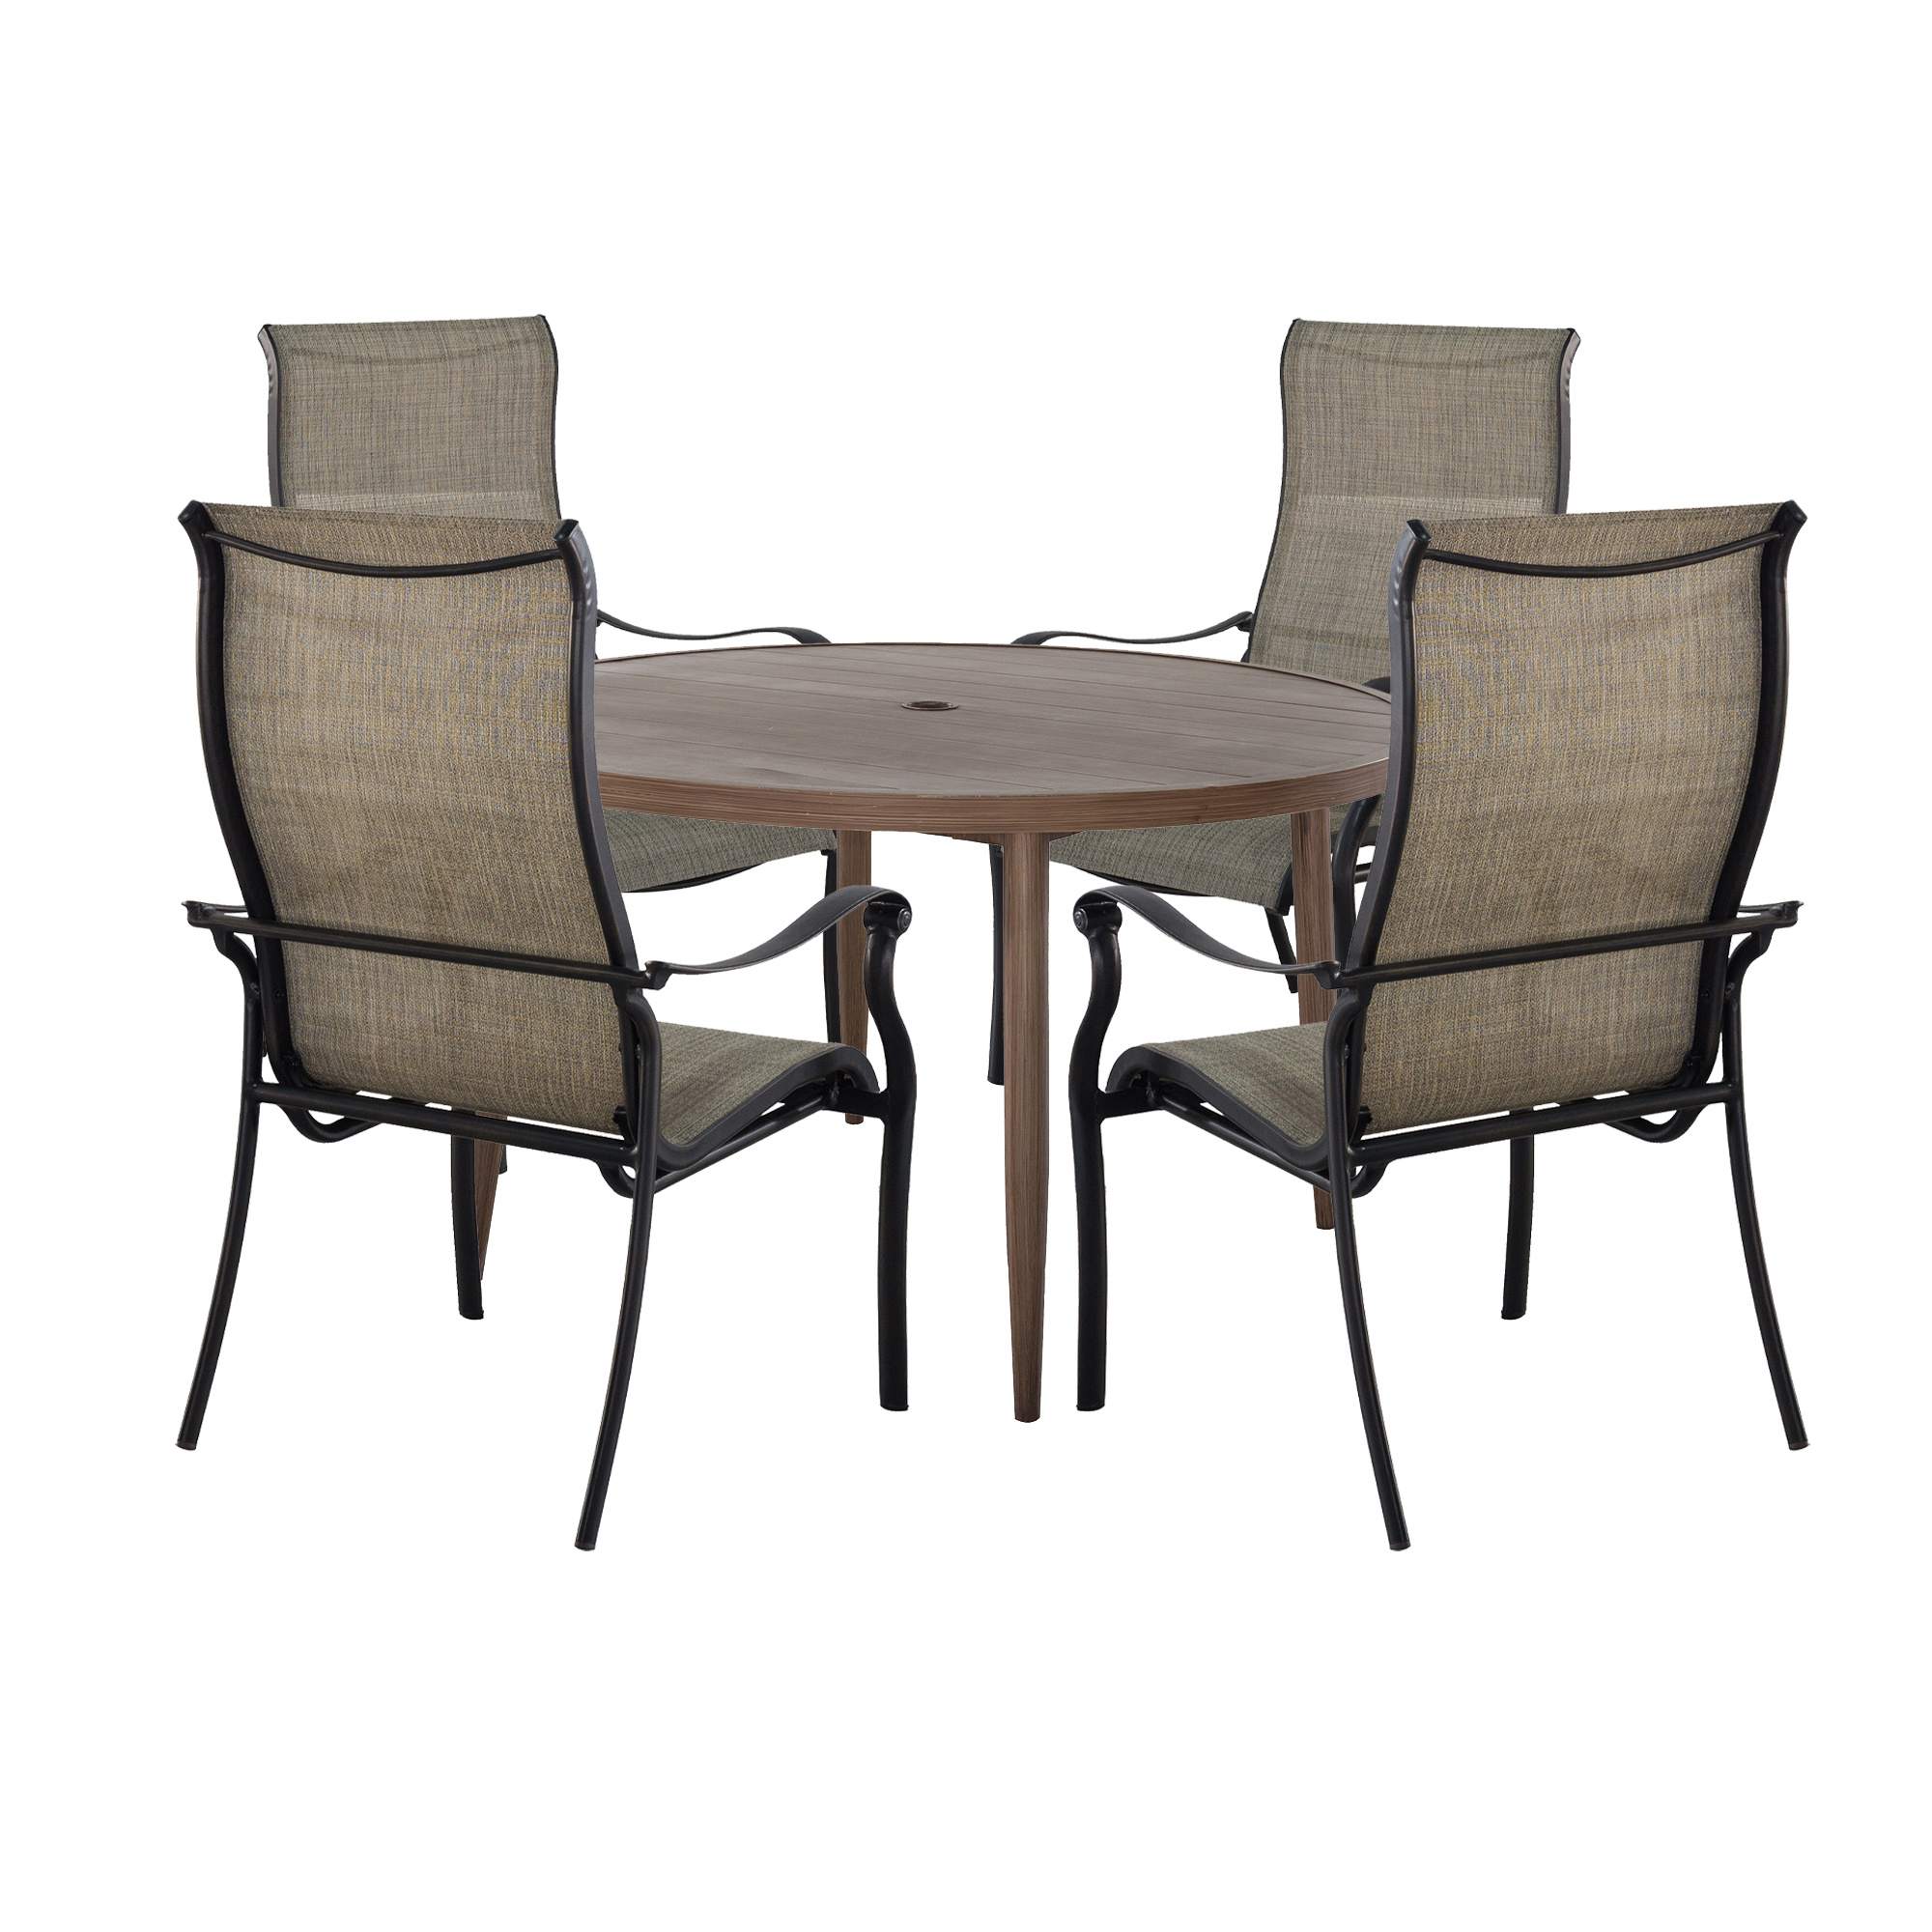 Cast Aluminum 5-Piece Outdoor Patio Dining Set with Wood-Finished Round Table and Textilene Chairs